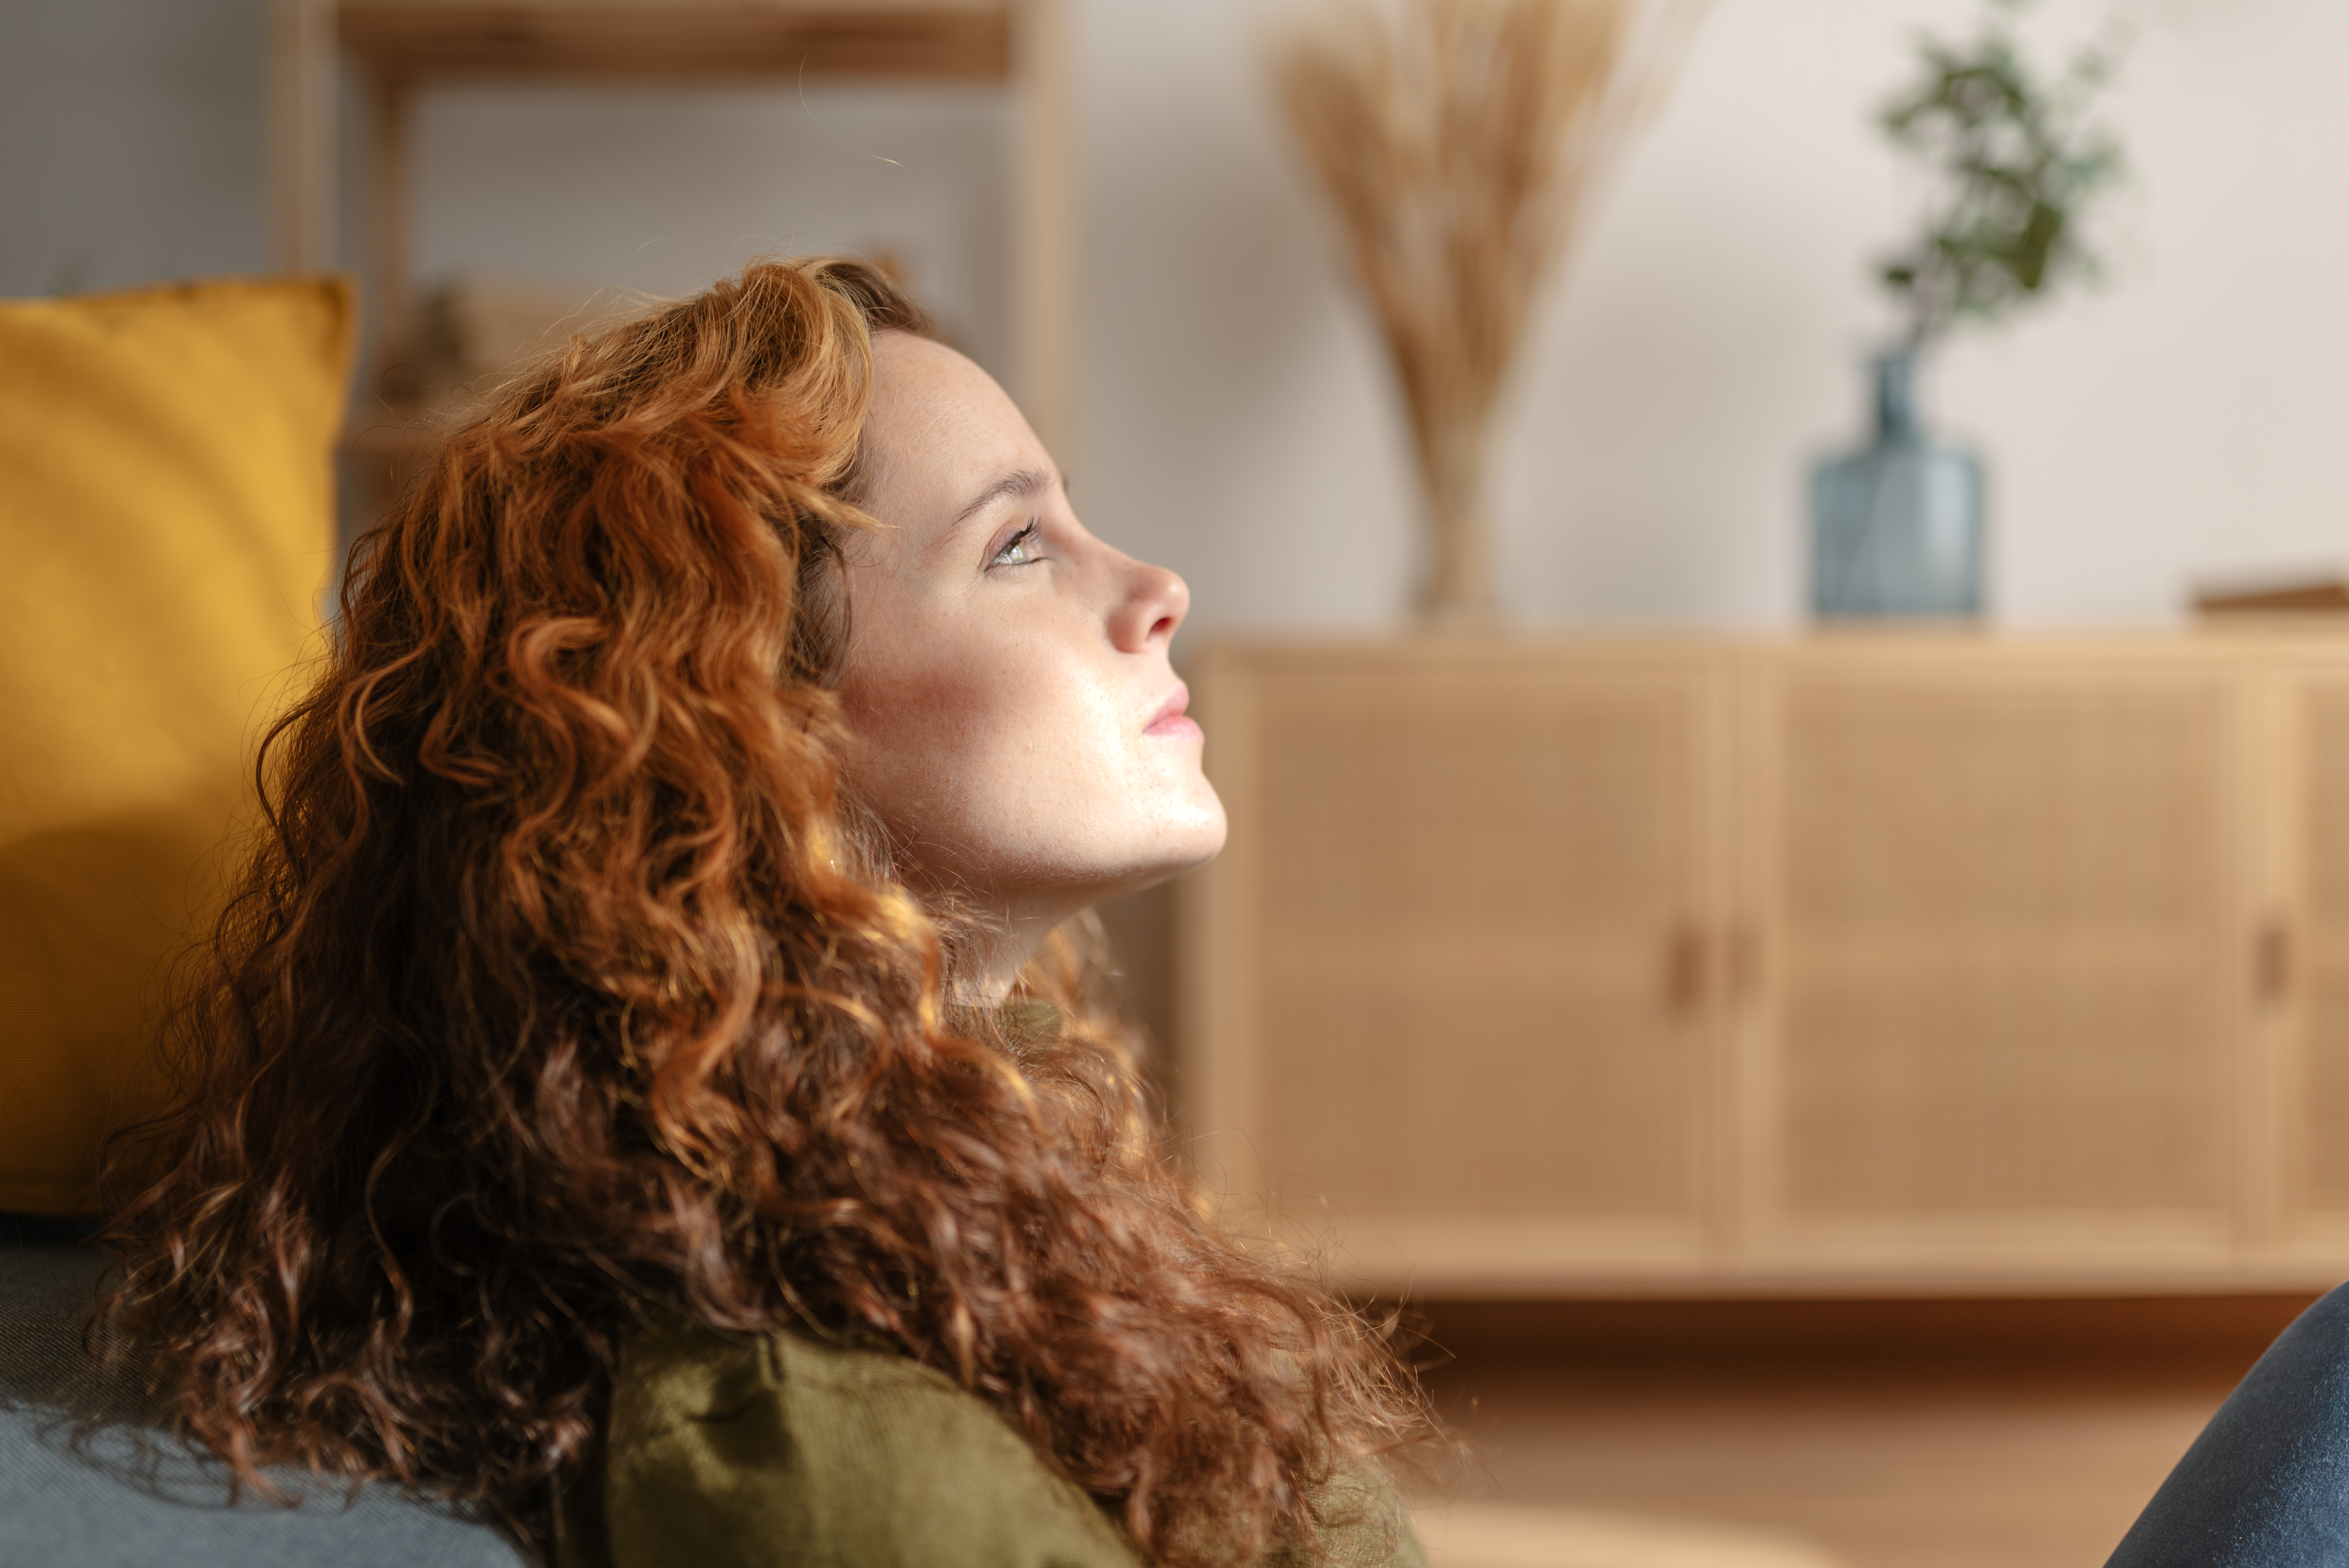 Close up view of a young redhead woman sitting on the floor, leaning her back on sofa and looking into the distance with sad face | Source: Getty Images